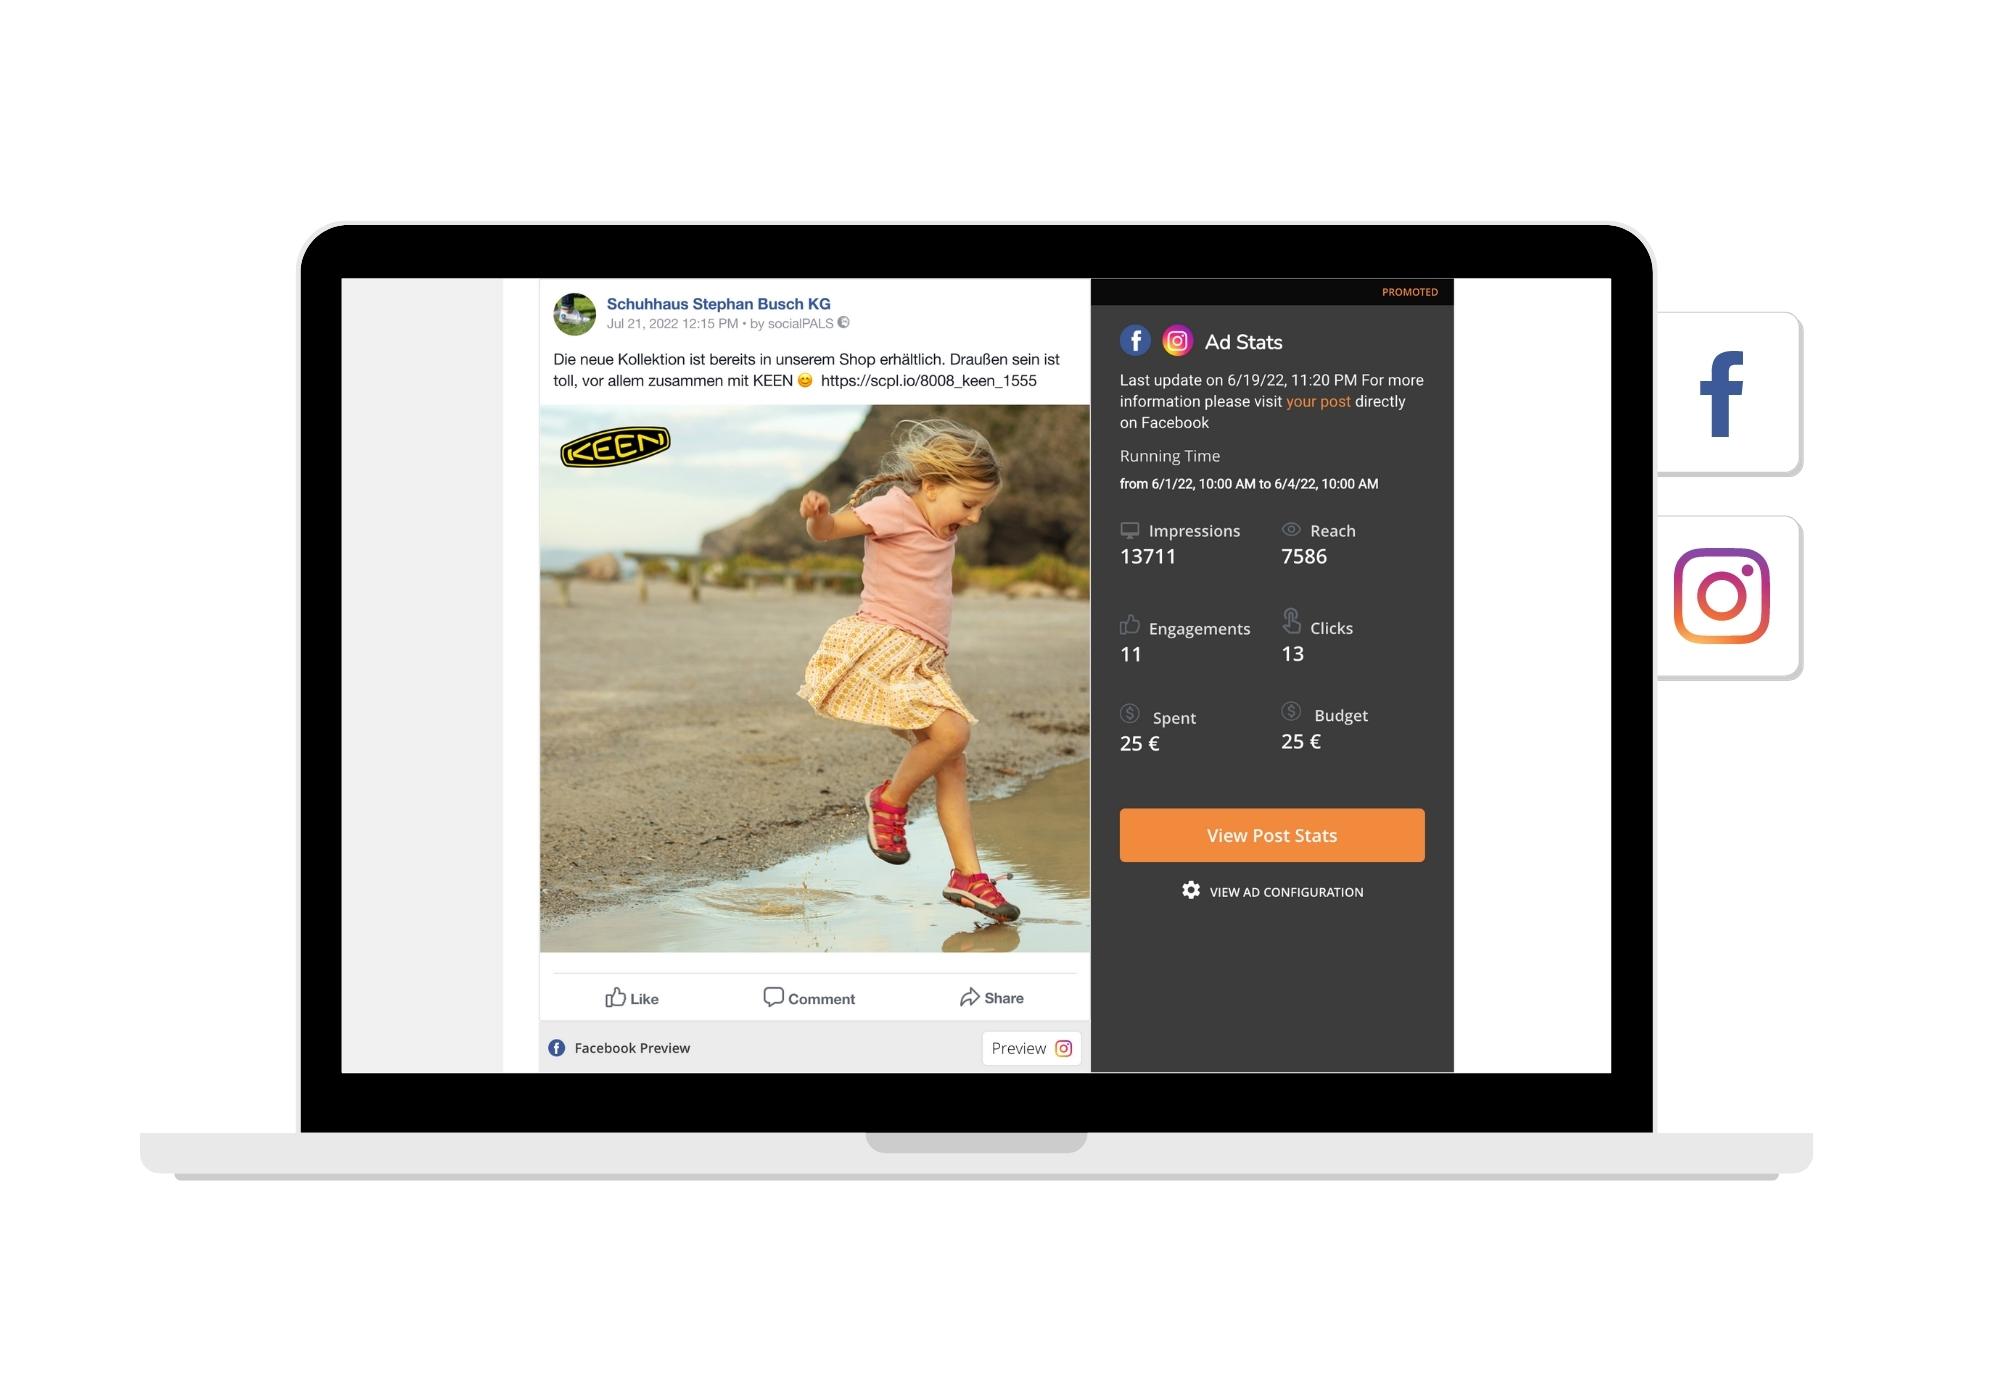 In the socialPALS dashboard, brands and retailers will find clear reporting for all ads placed.